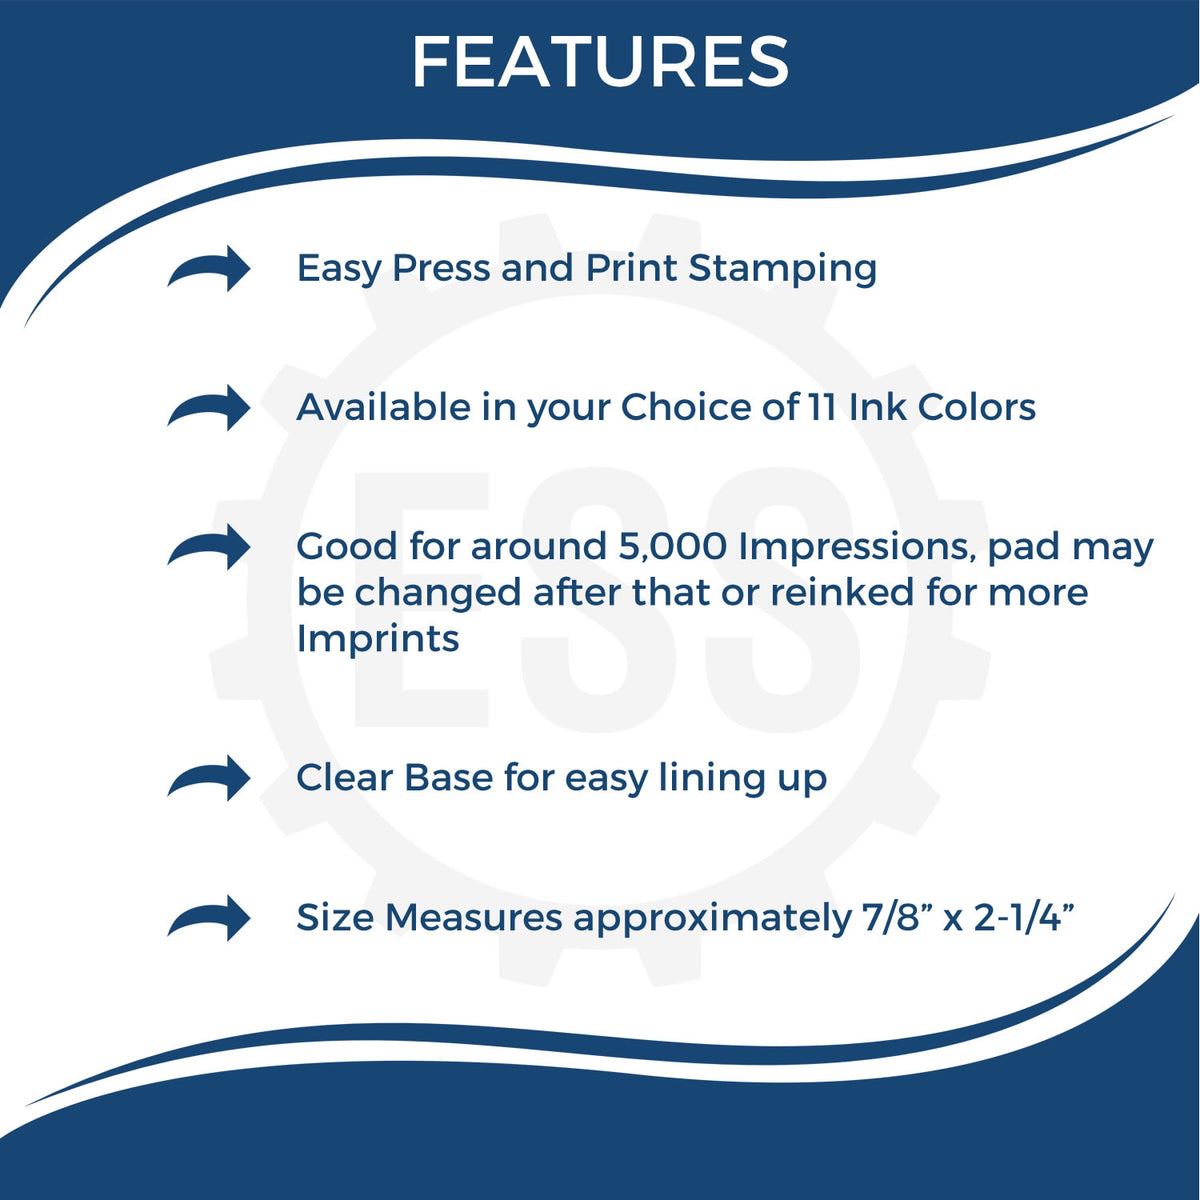 Large Self-Inking Copy For Your Information Stamp